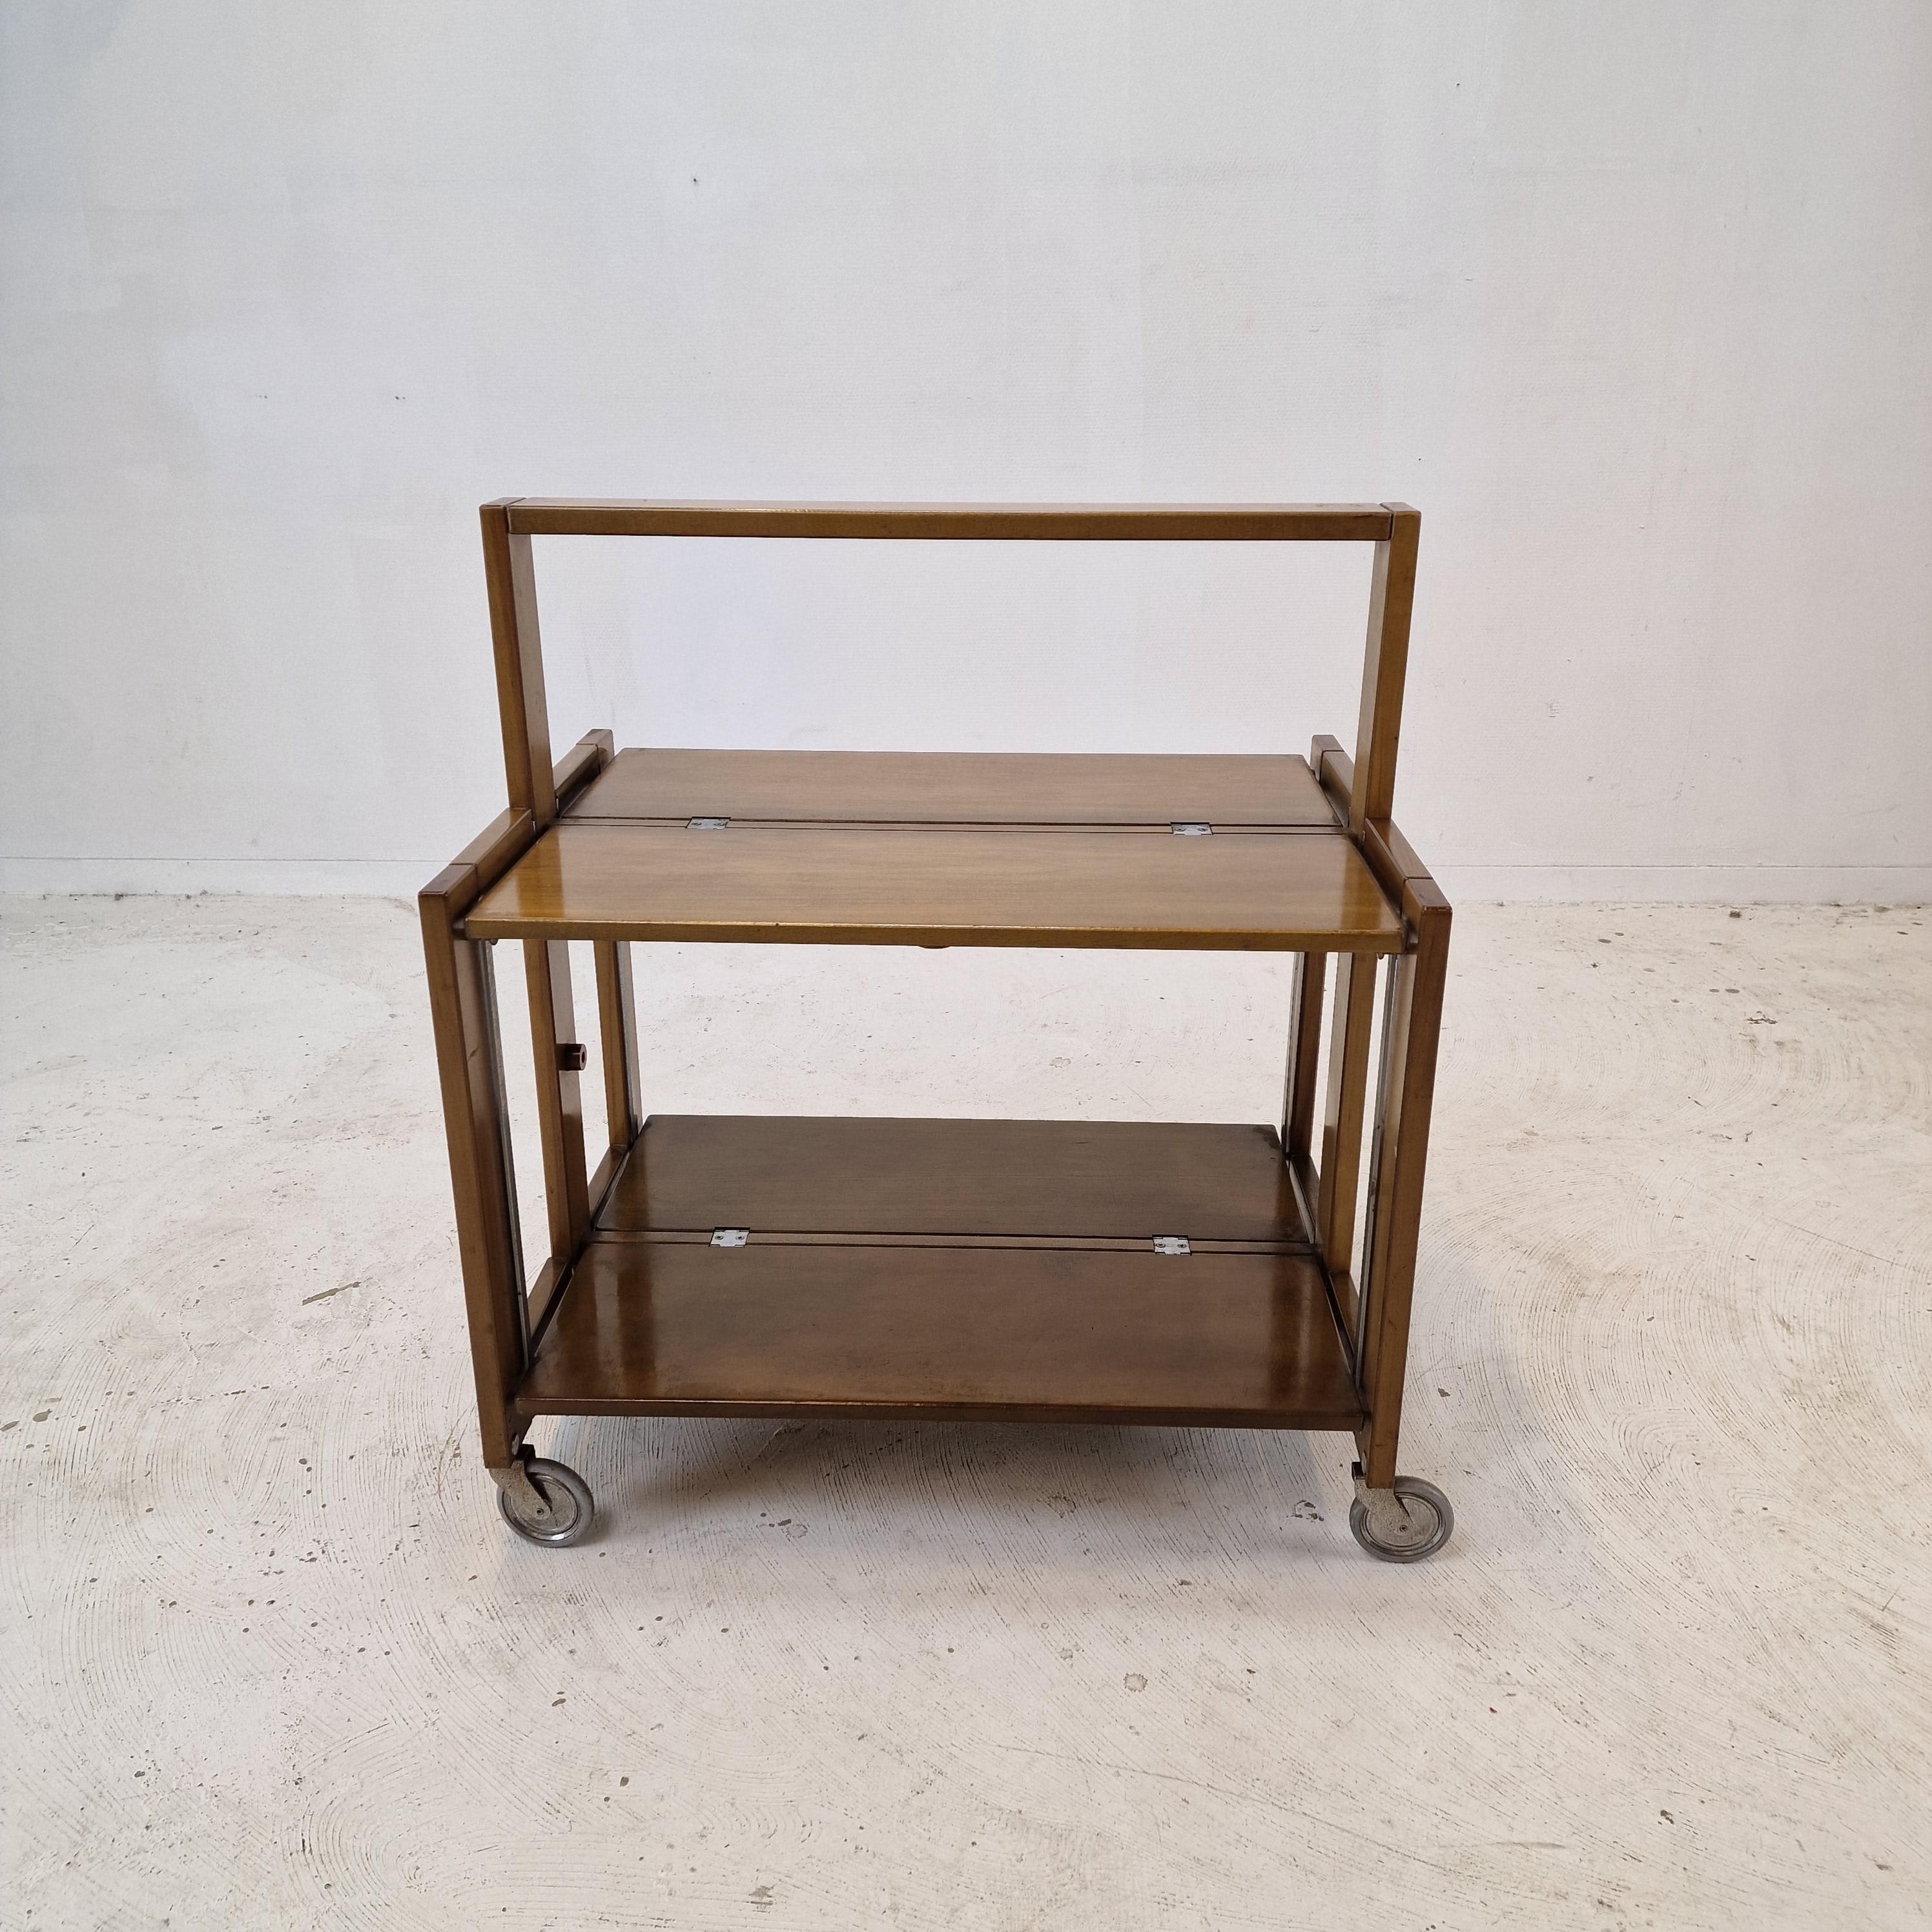 Very nice folding trolley, designed by Carrello Tobia.
It is manufactured by Ciatti Brevettato in the 60's in Italy.

The trolley is made of beautiful wood and has 4 wheels.

When it is folded the size is:
10 cm (3.94